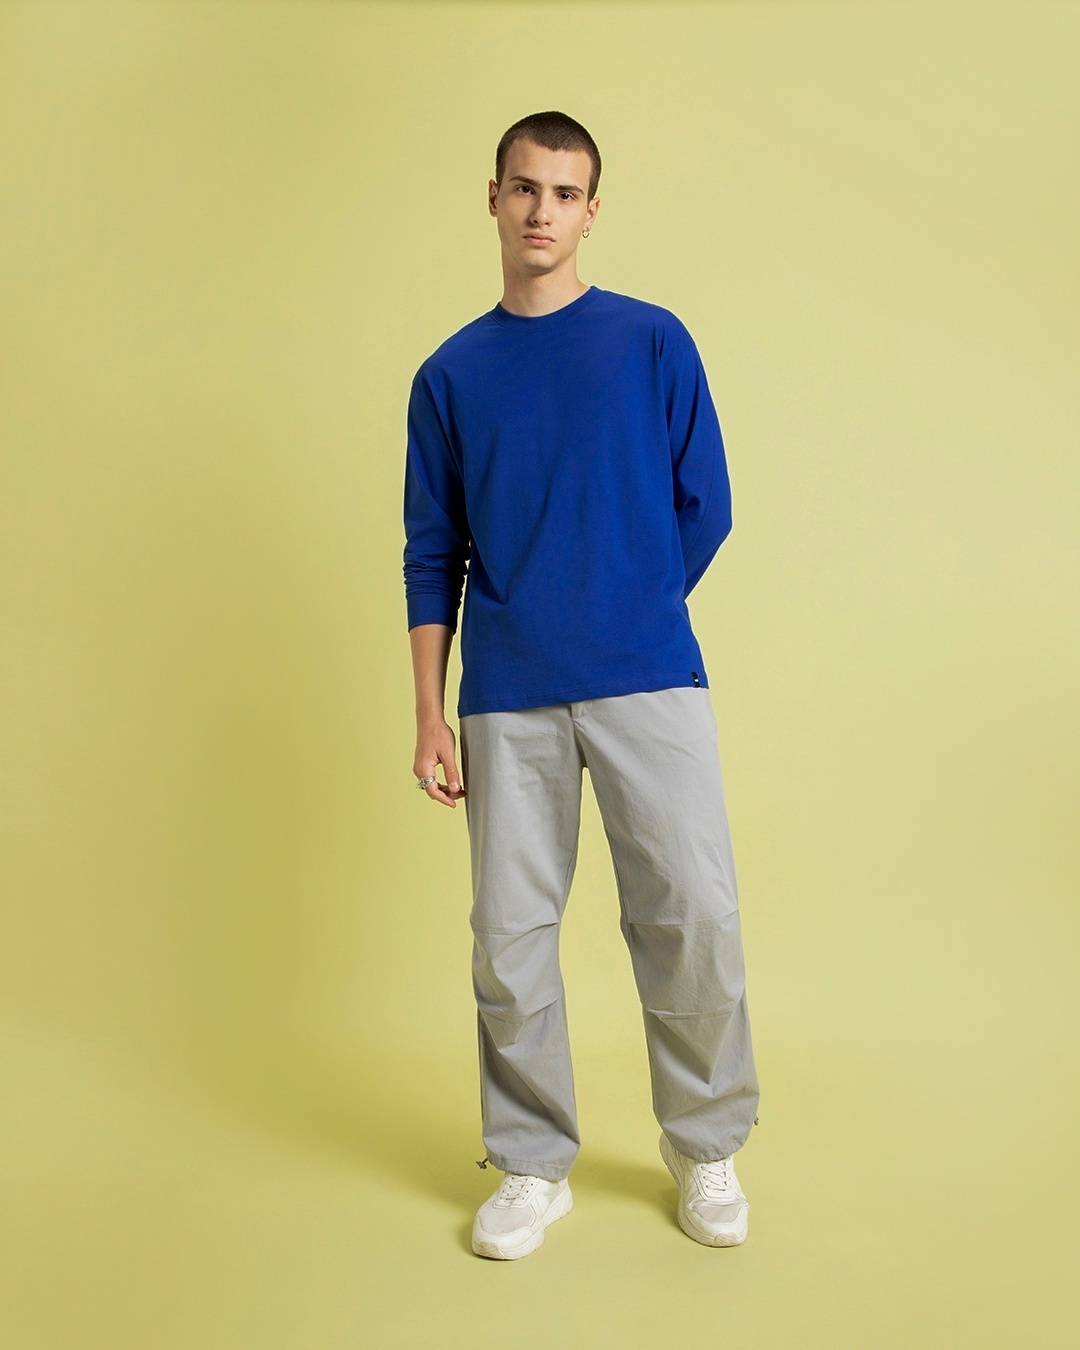 Blue T-shirt Combination: Check Out 10 Best Ways To Pair It